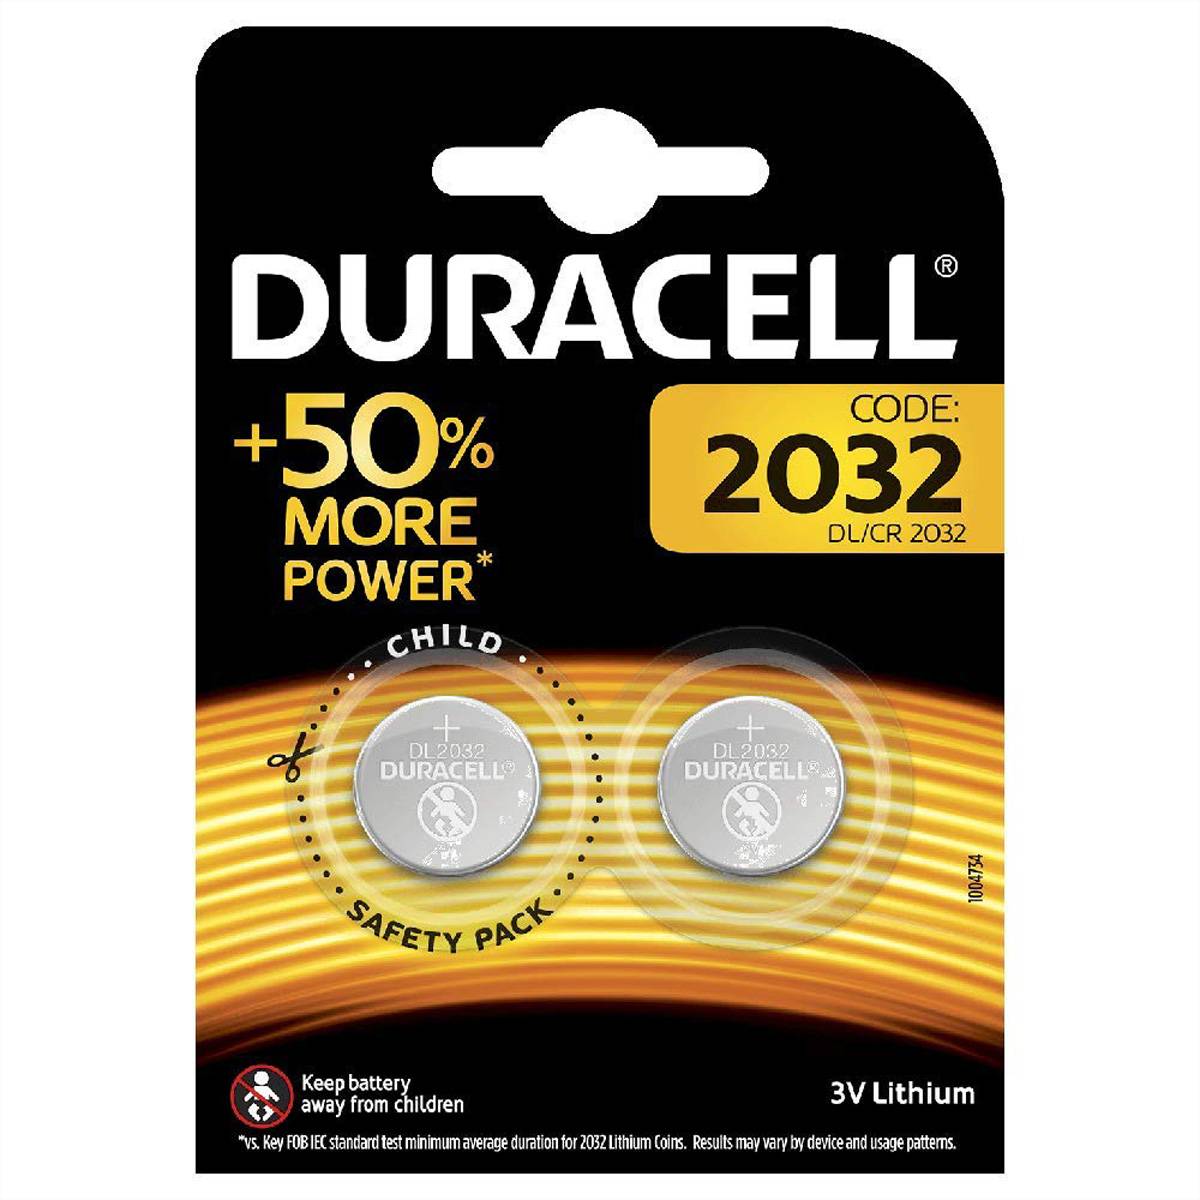 Duracell CR2032 3V Battery, 8 count $8.10